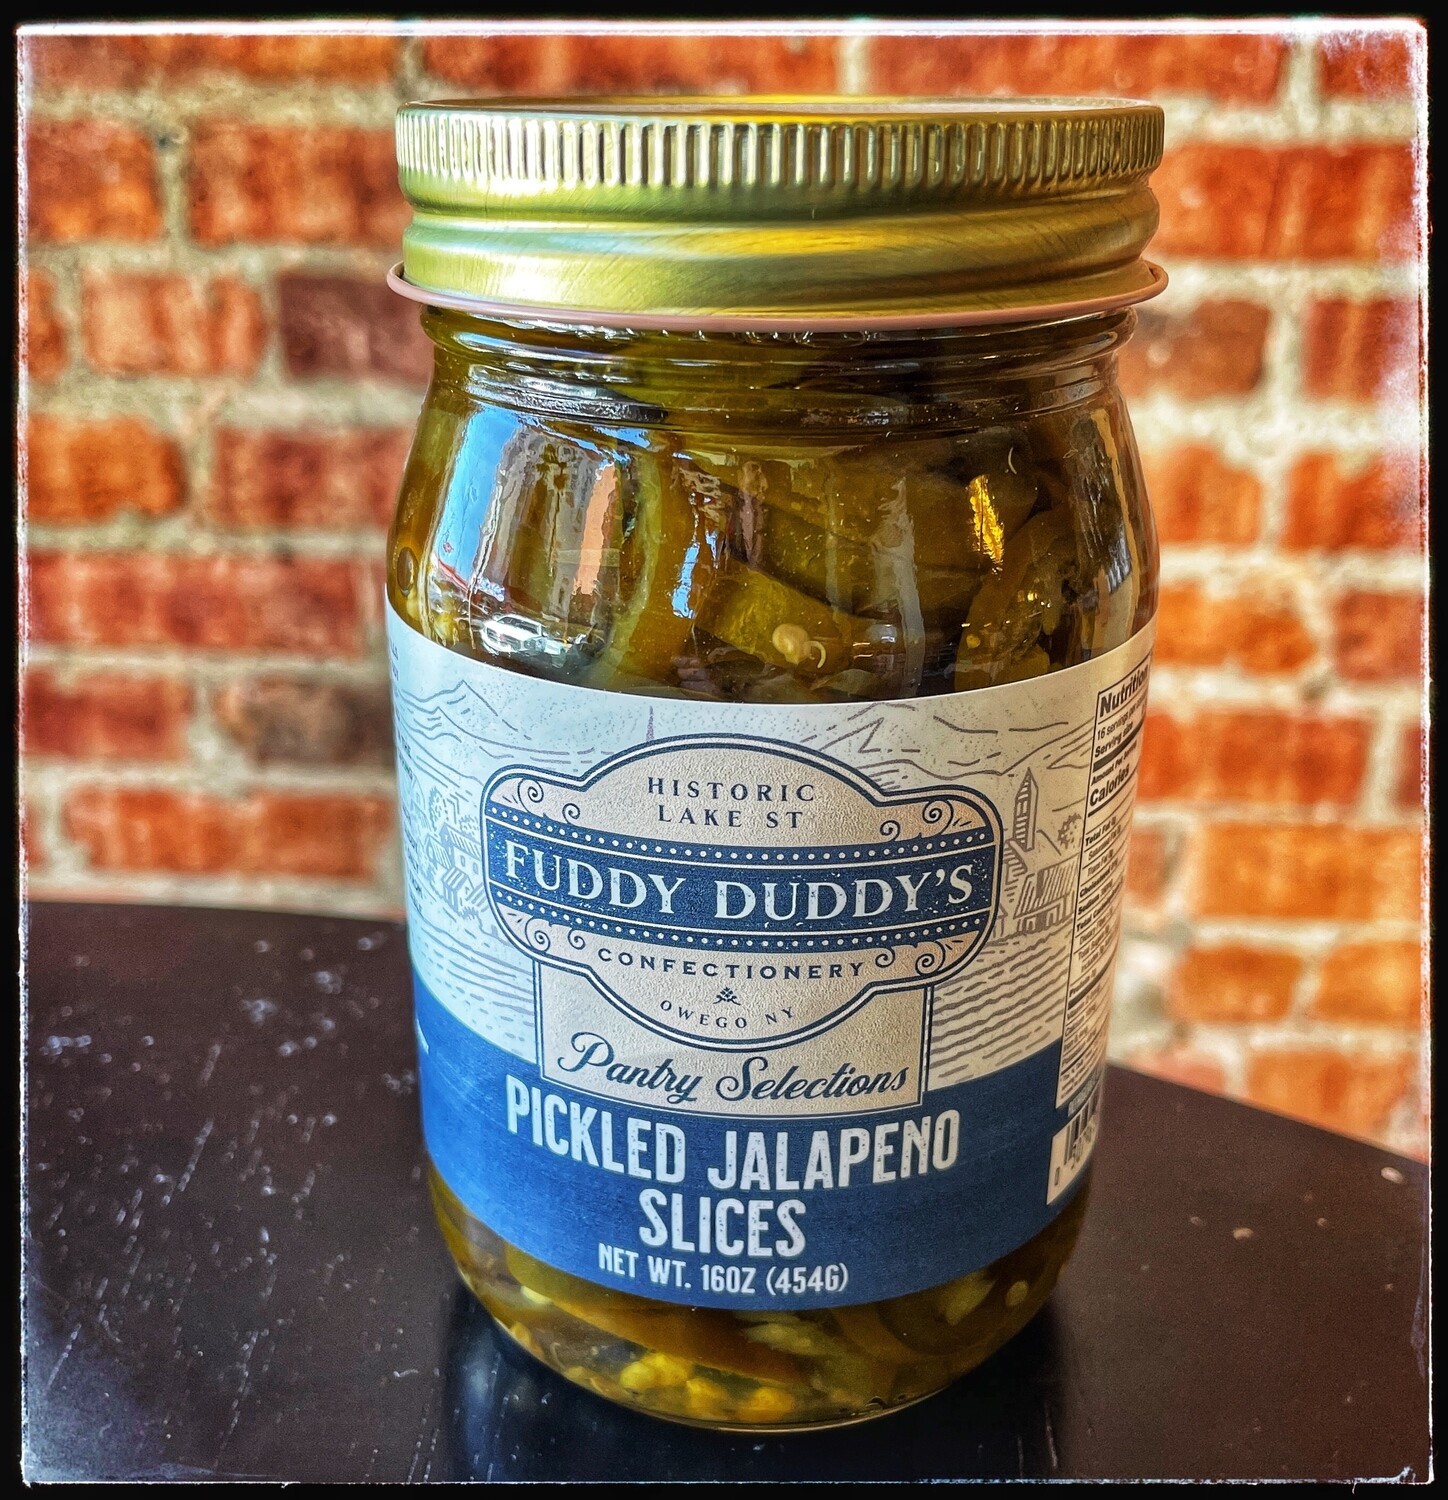 Fuddy Duddy's Pickled Jalapeno Slices